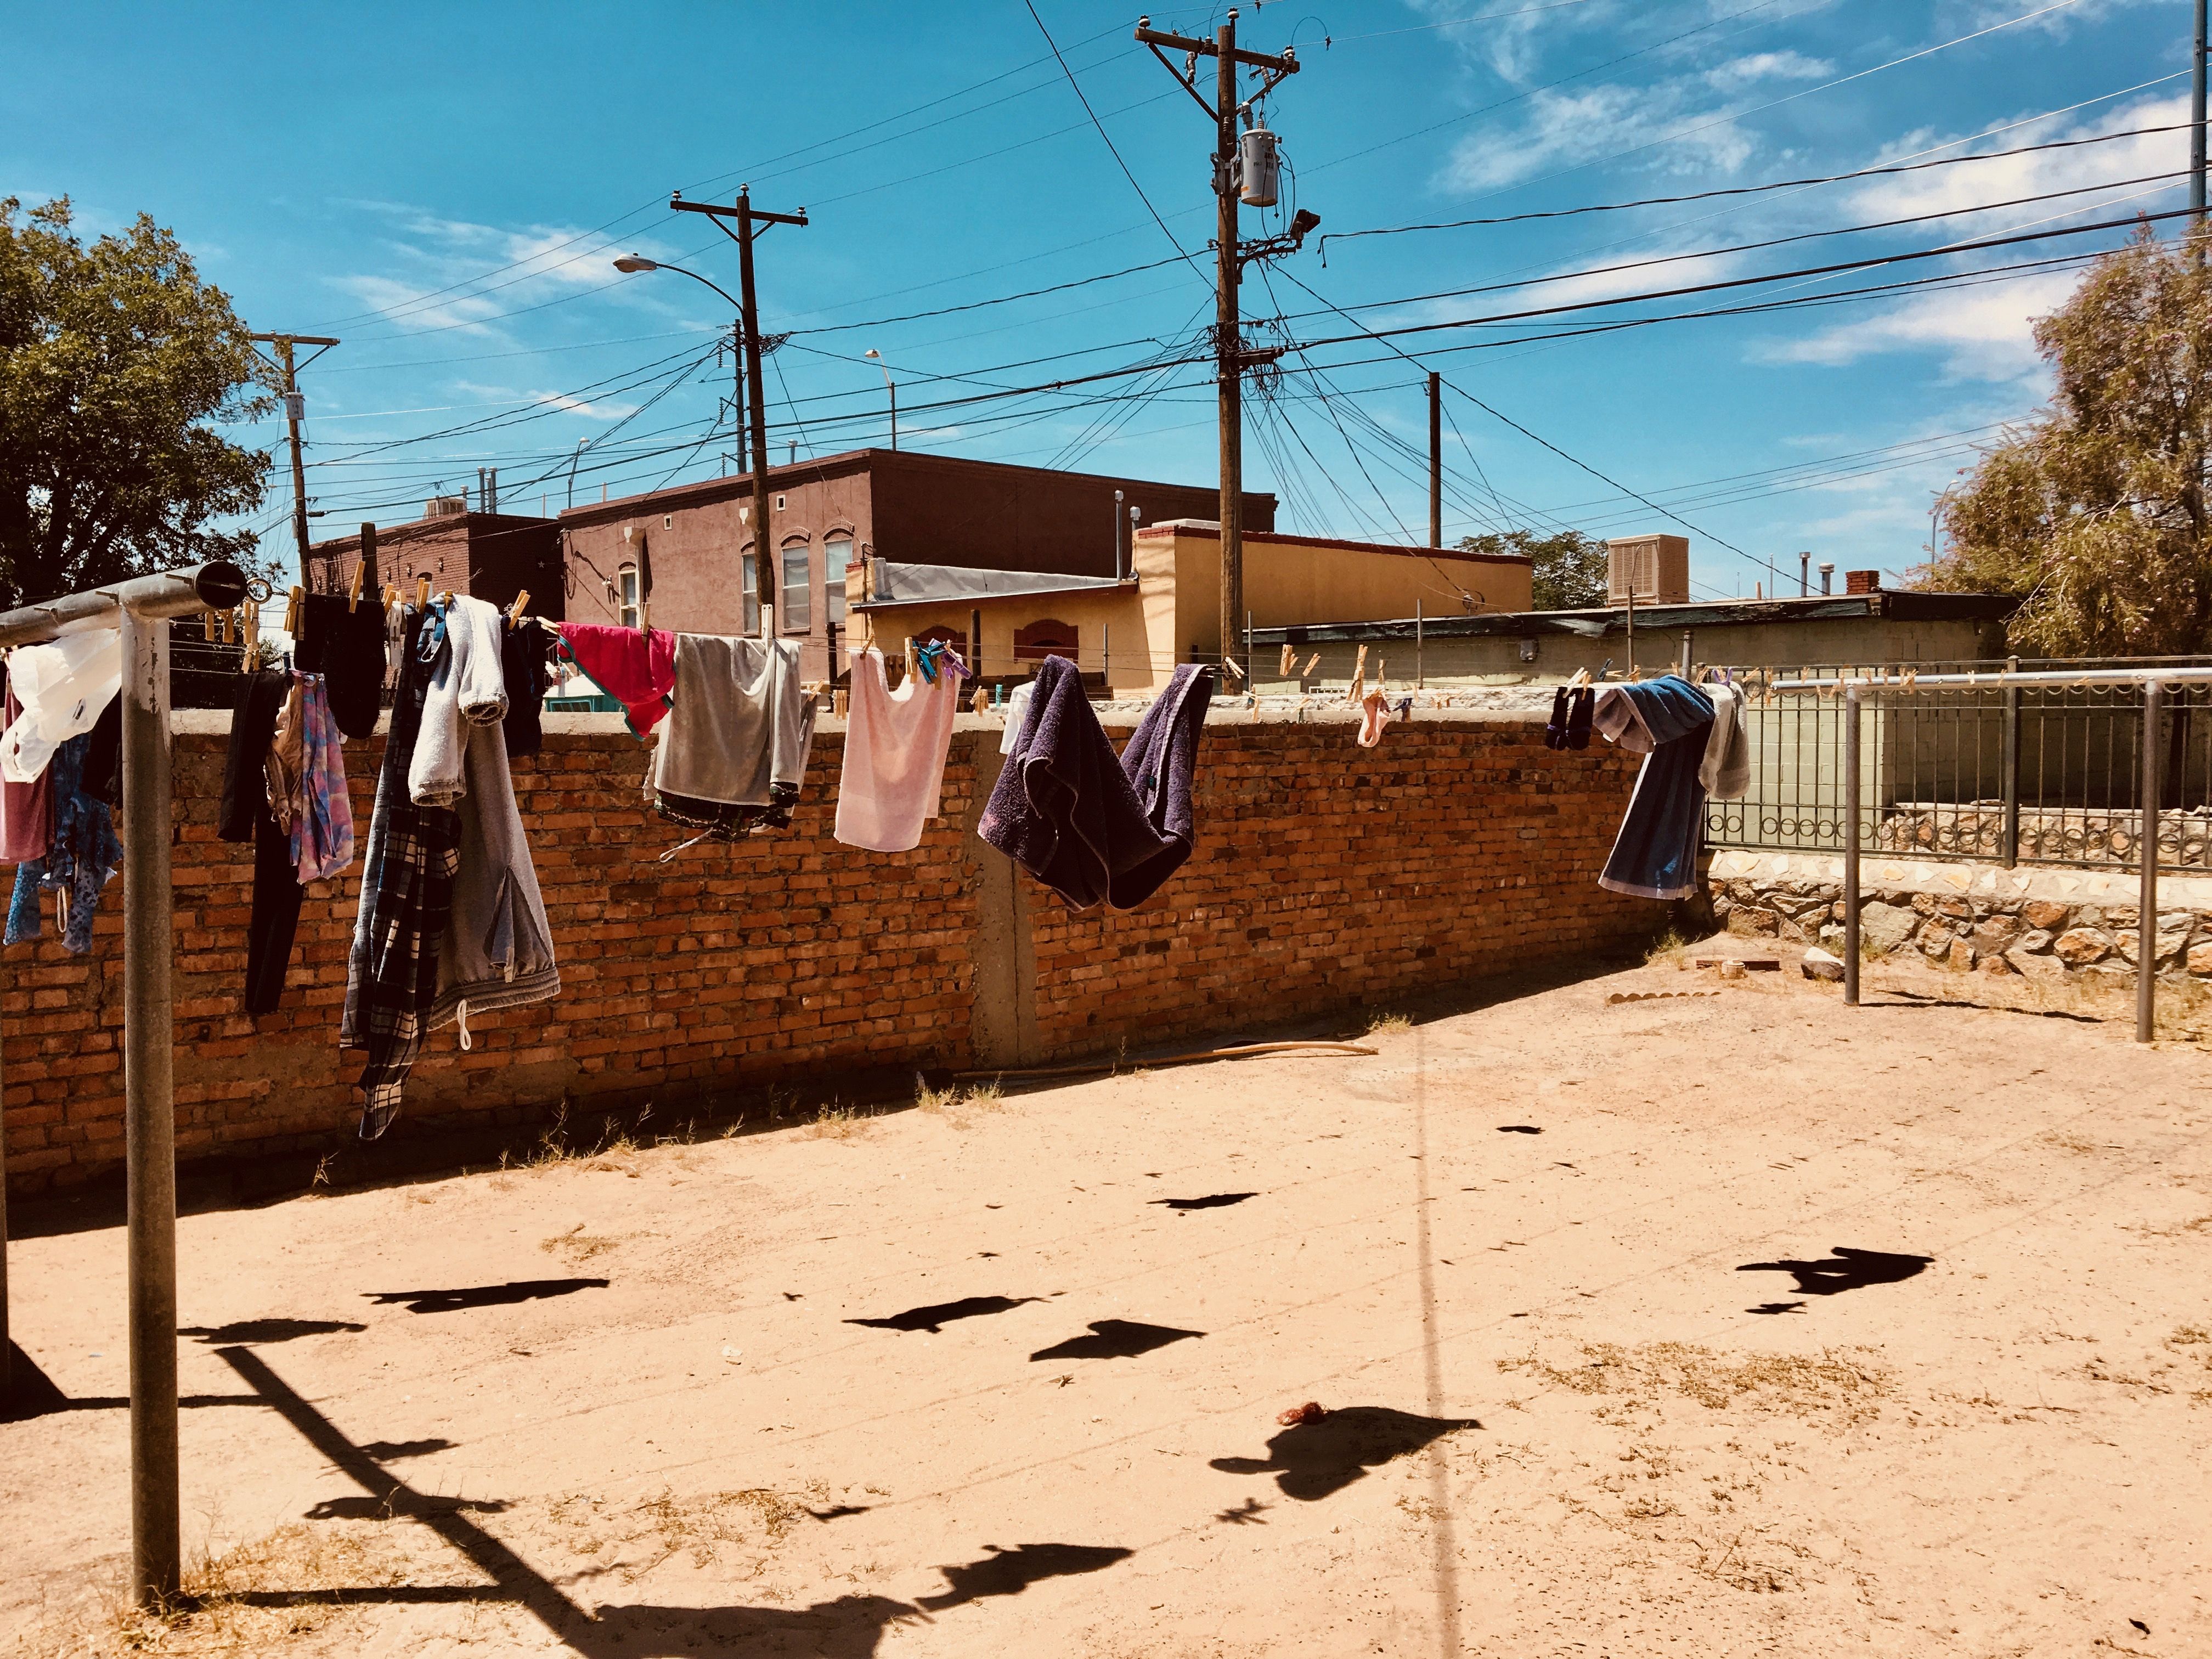 A clothesline behind Casa Vides. Because of the “Remain in Mexico” policy, Casa Vides isn’t as full as usual, but the shelter continues to receive a steady trickle of migrants. Image by Lily Moore-Eissenberg. United States, 2019.